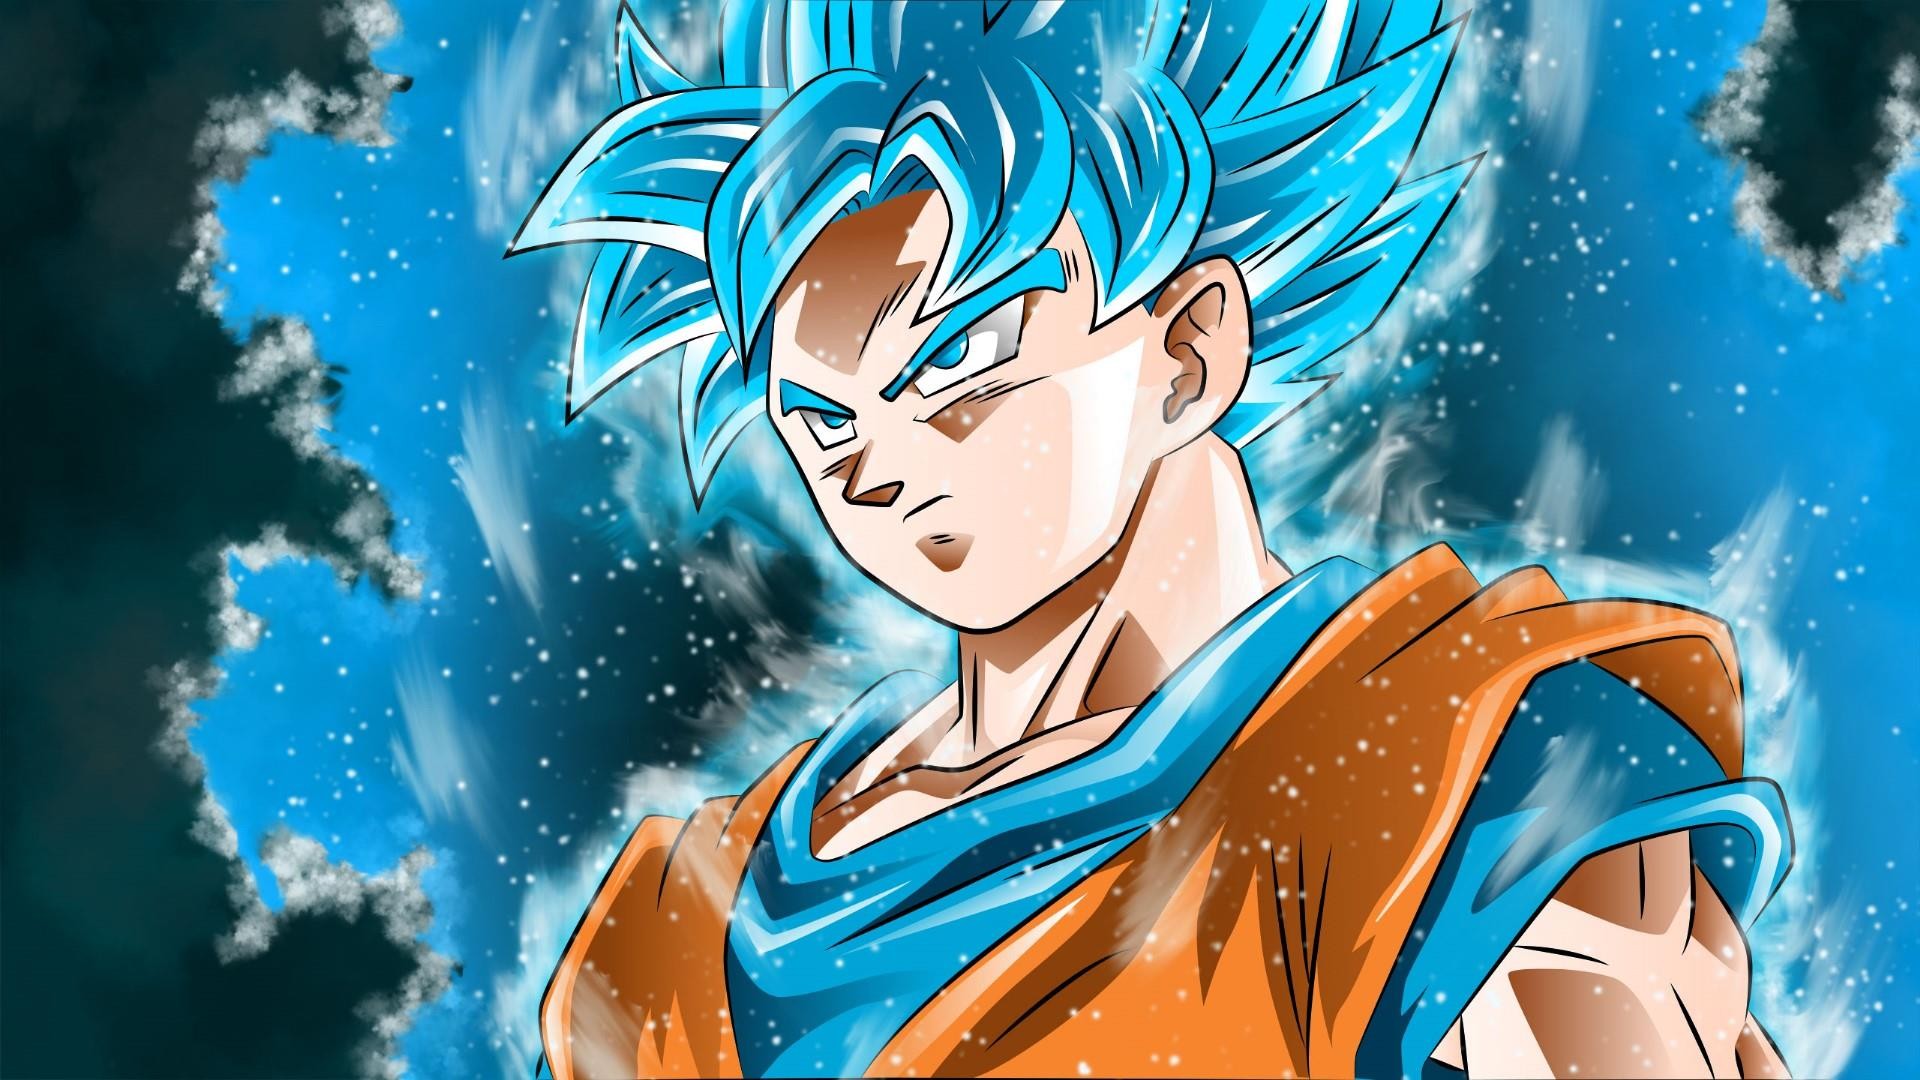 HD Goku SSJ Blue Backgrounds with image resolution 1920x1080 pixel. You can use this wallpaper as background for your desktop Computer Screensavers, Android or iPhone smartphones